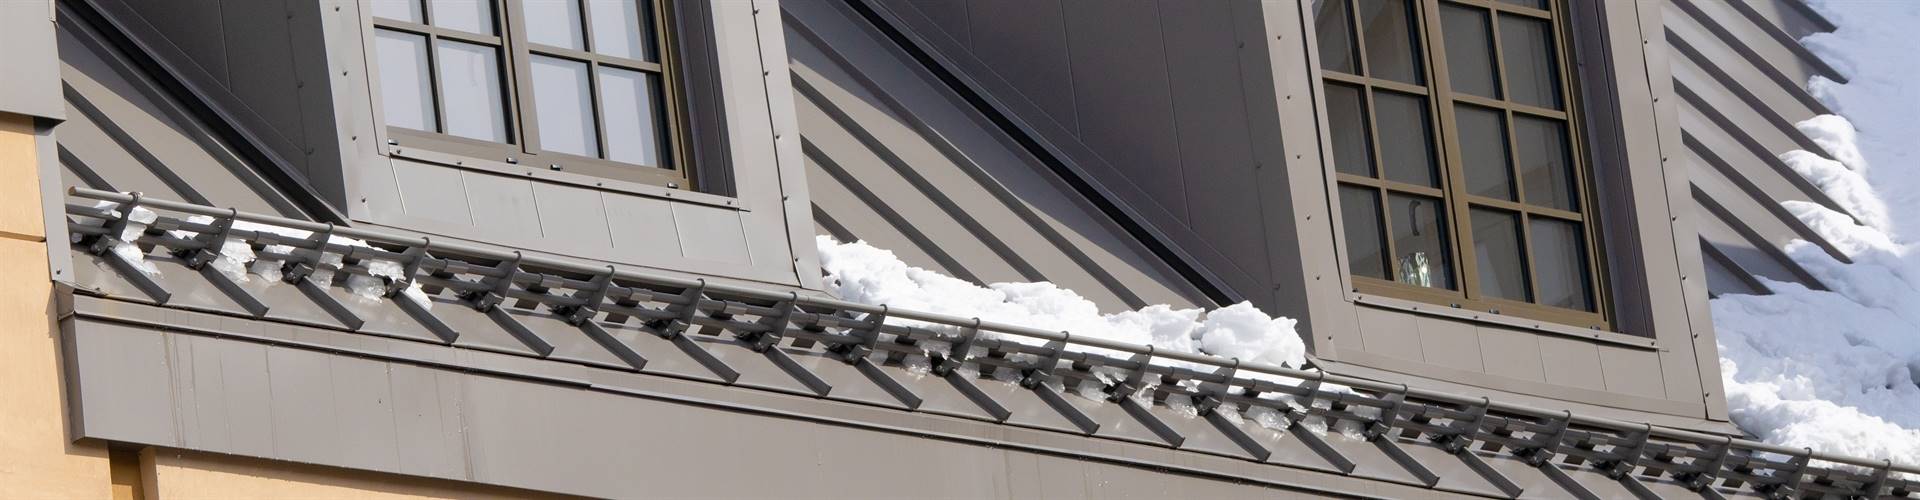 Precision Engineered, non-penetrative metal roof snow guards